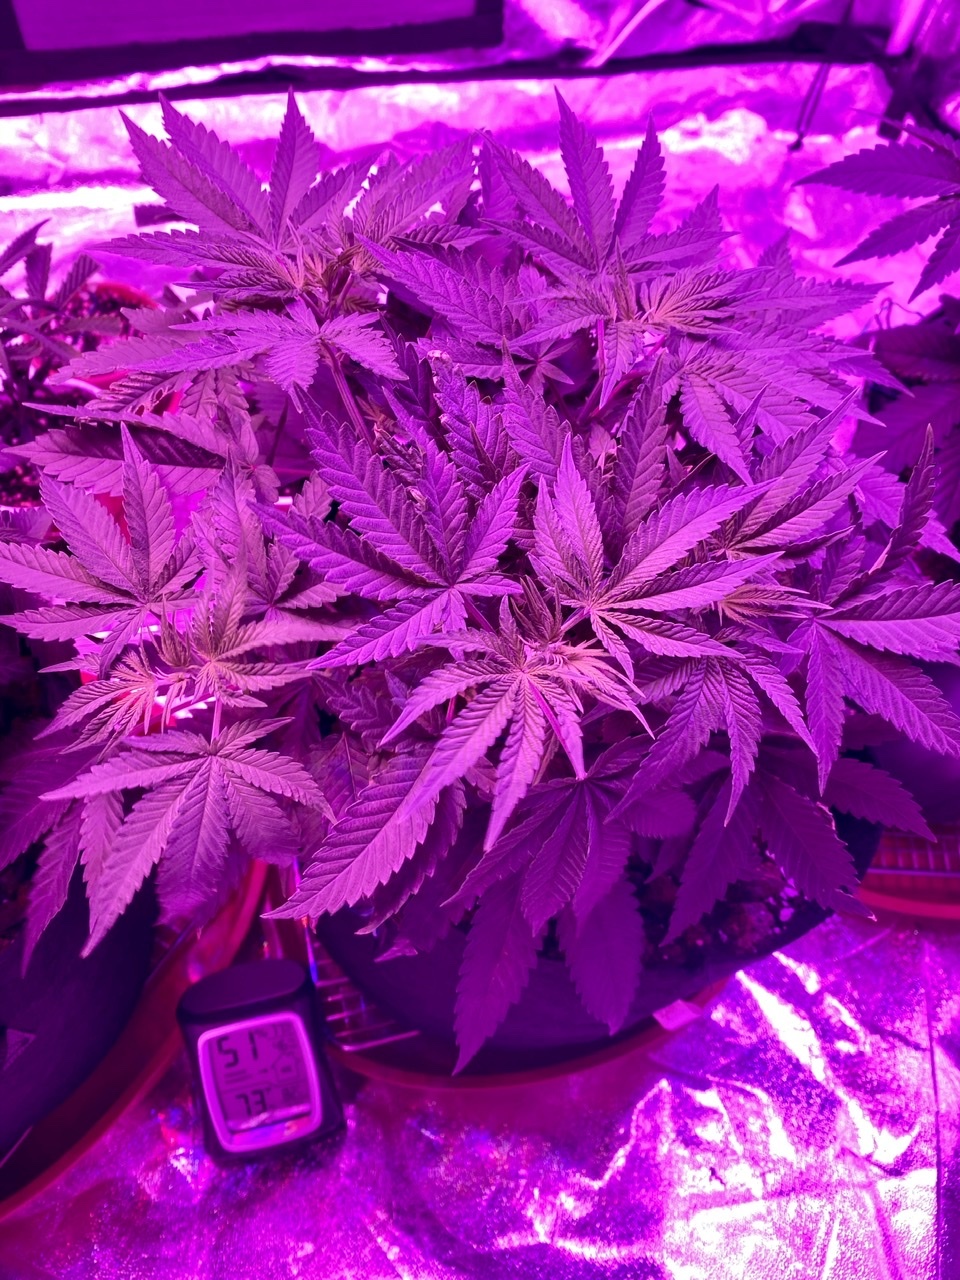 Quick update after lst and feedings thanks for all the knowledge ive found here happy growing 3